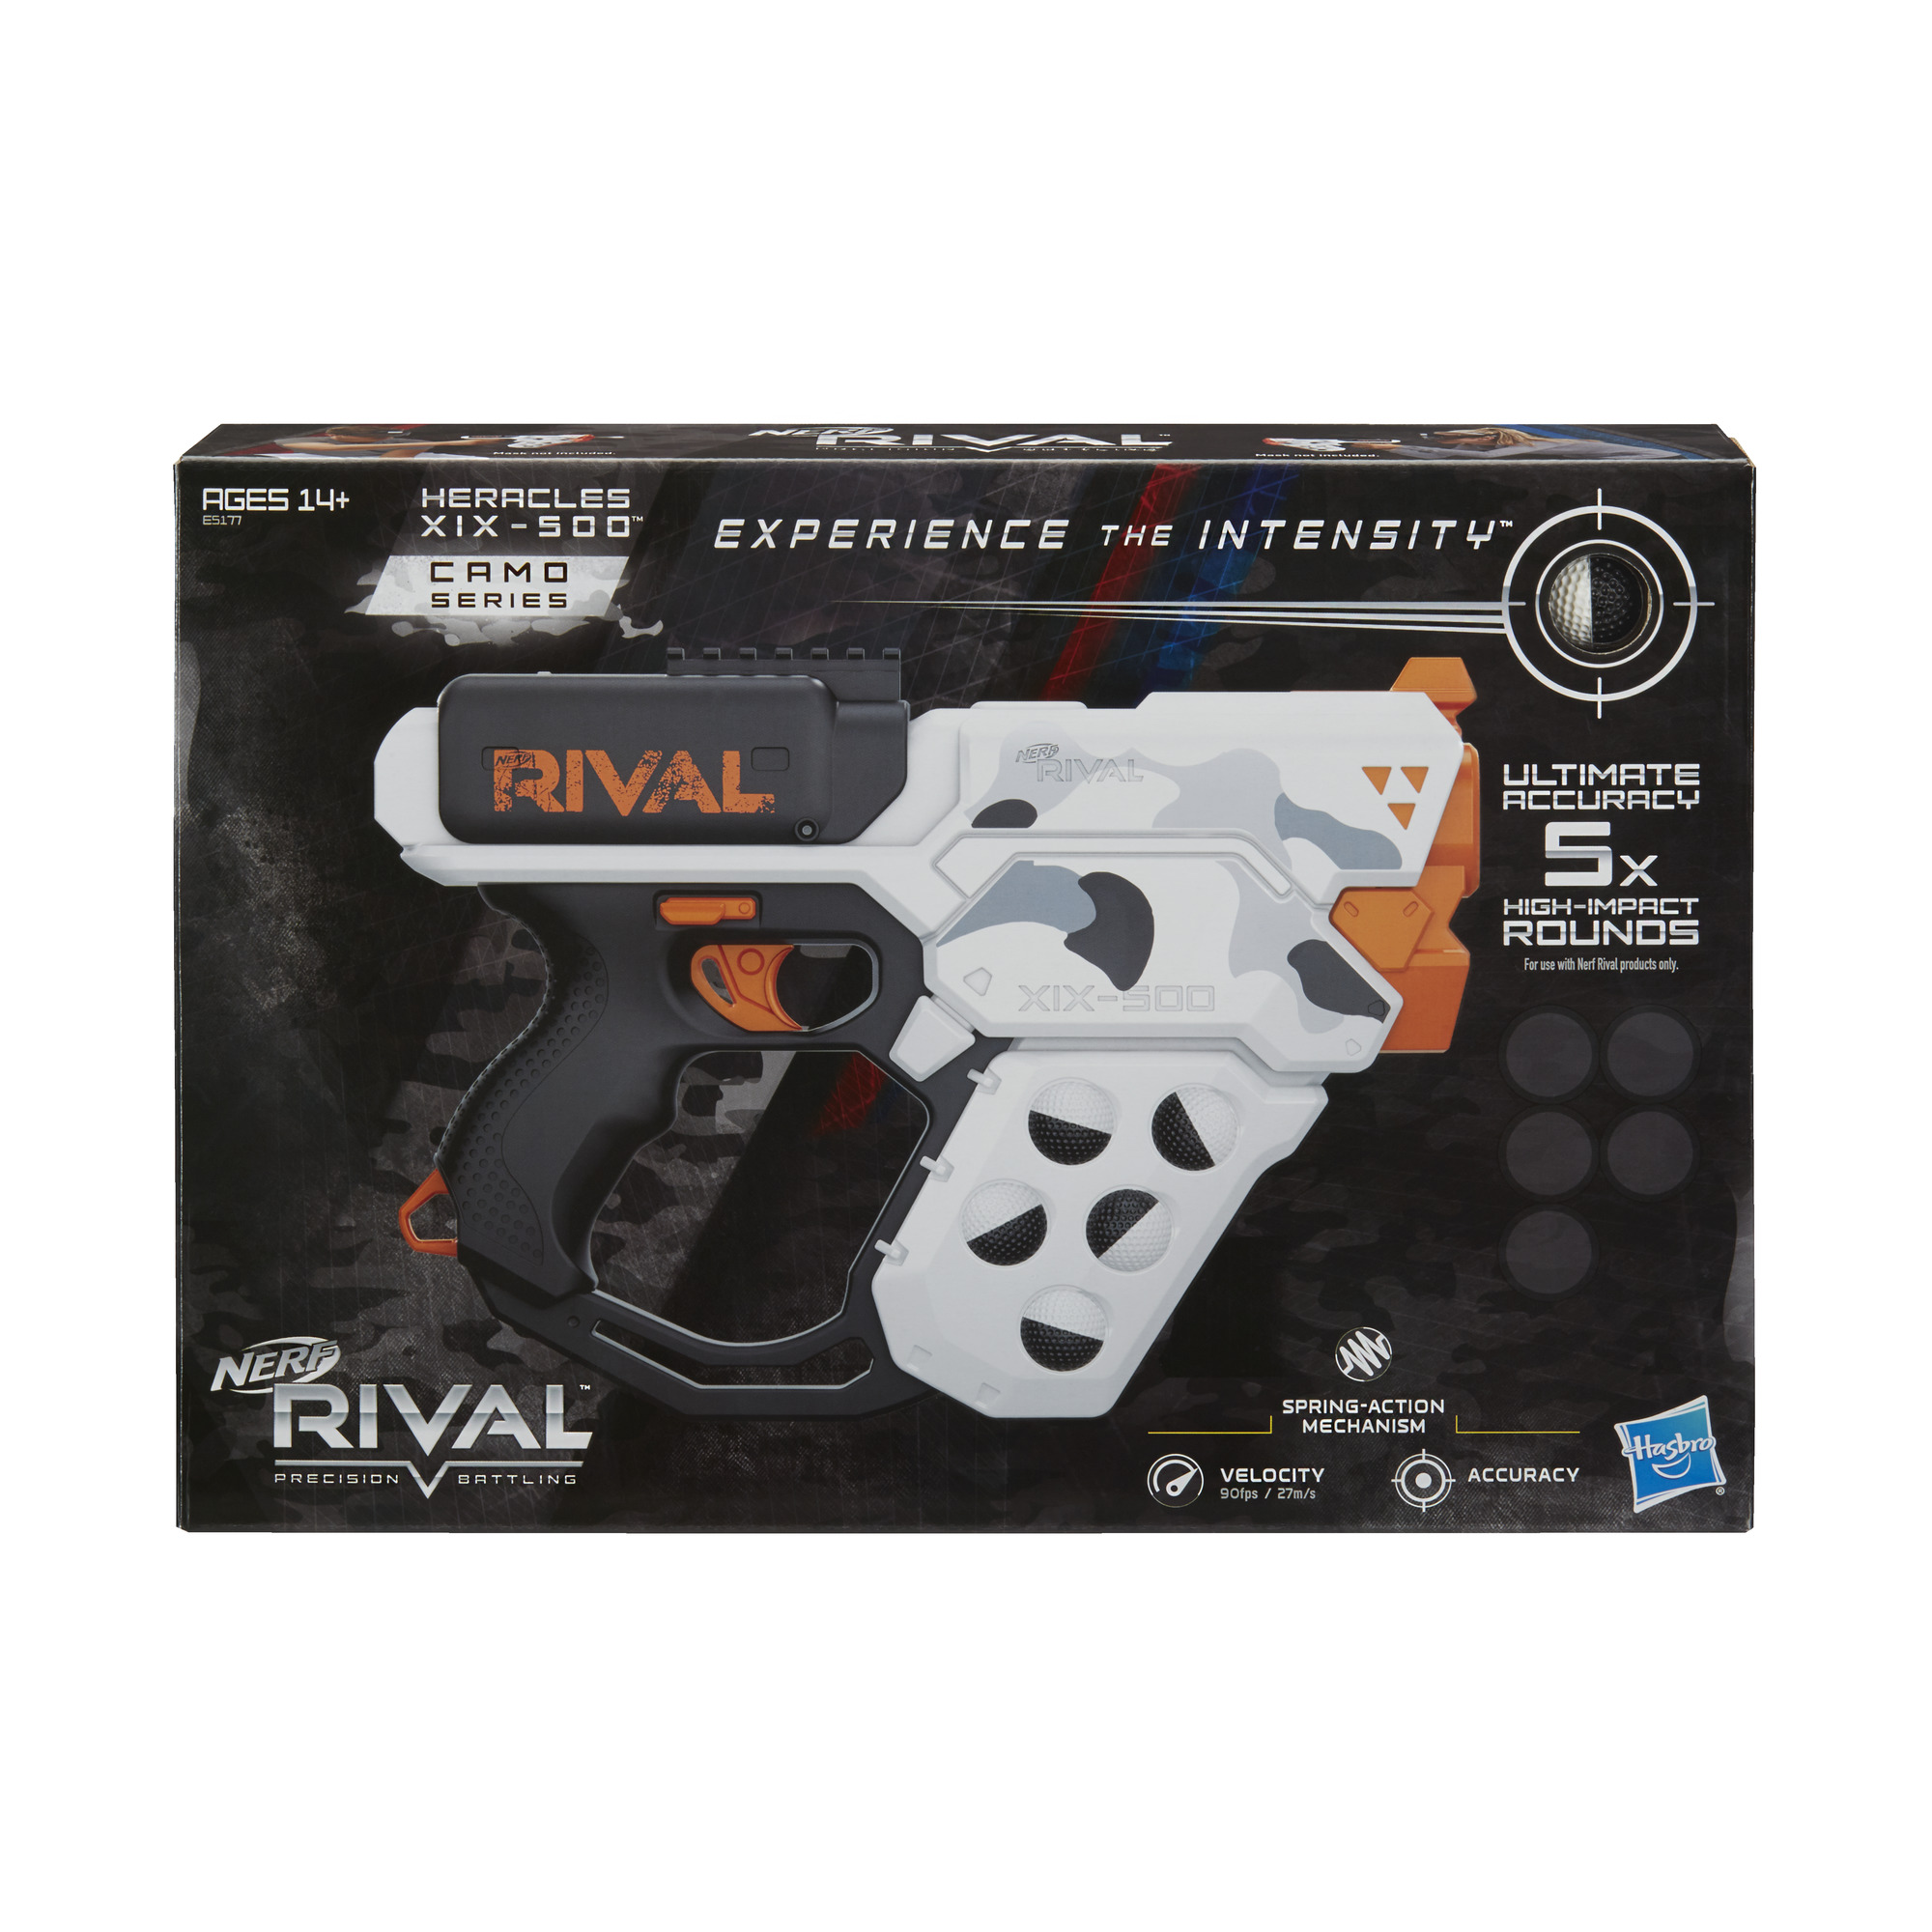 Nerf Rival Heracles XIX-500 Camo Series, 5 Rounds, - image 2 of 11